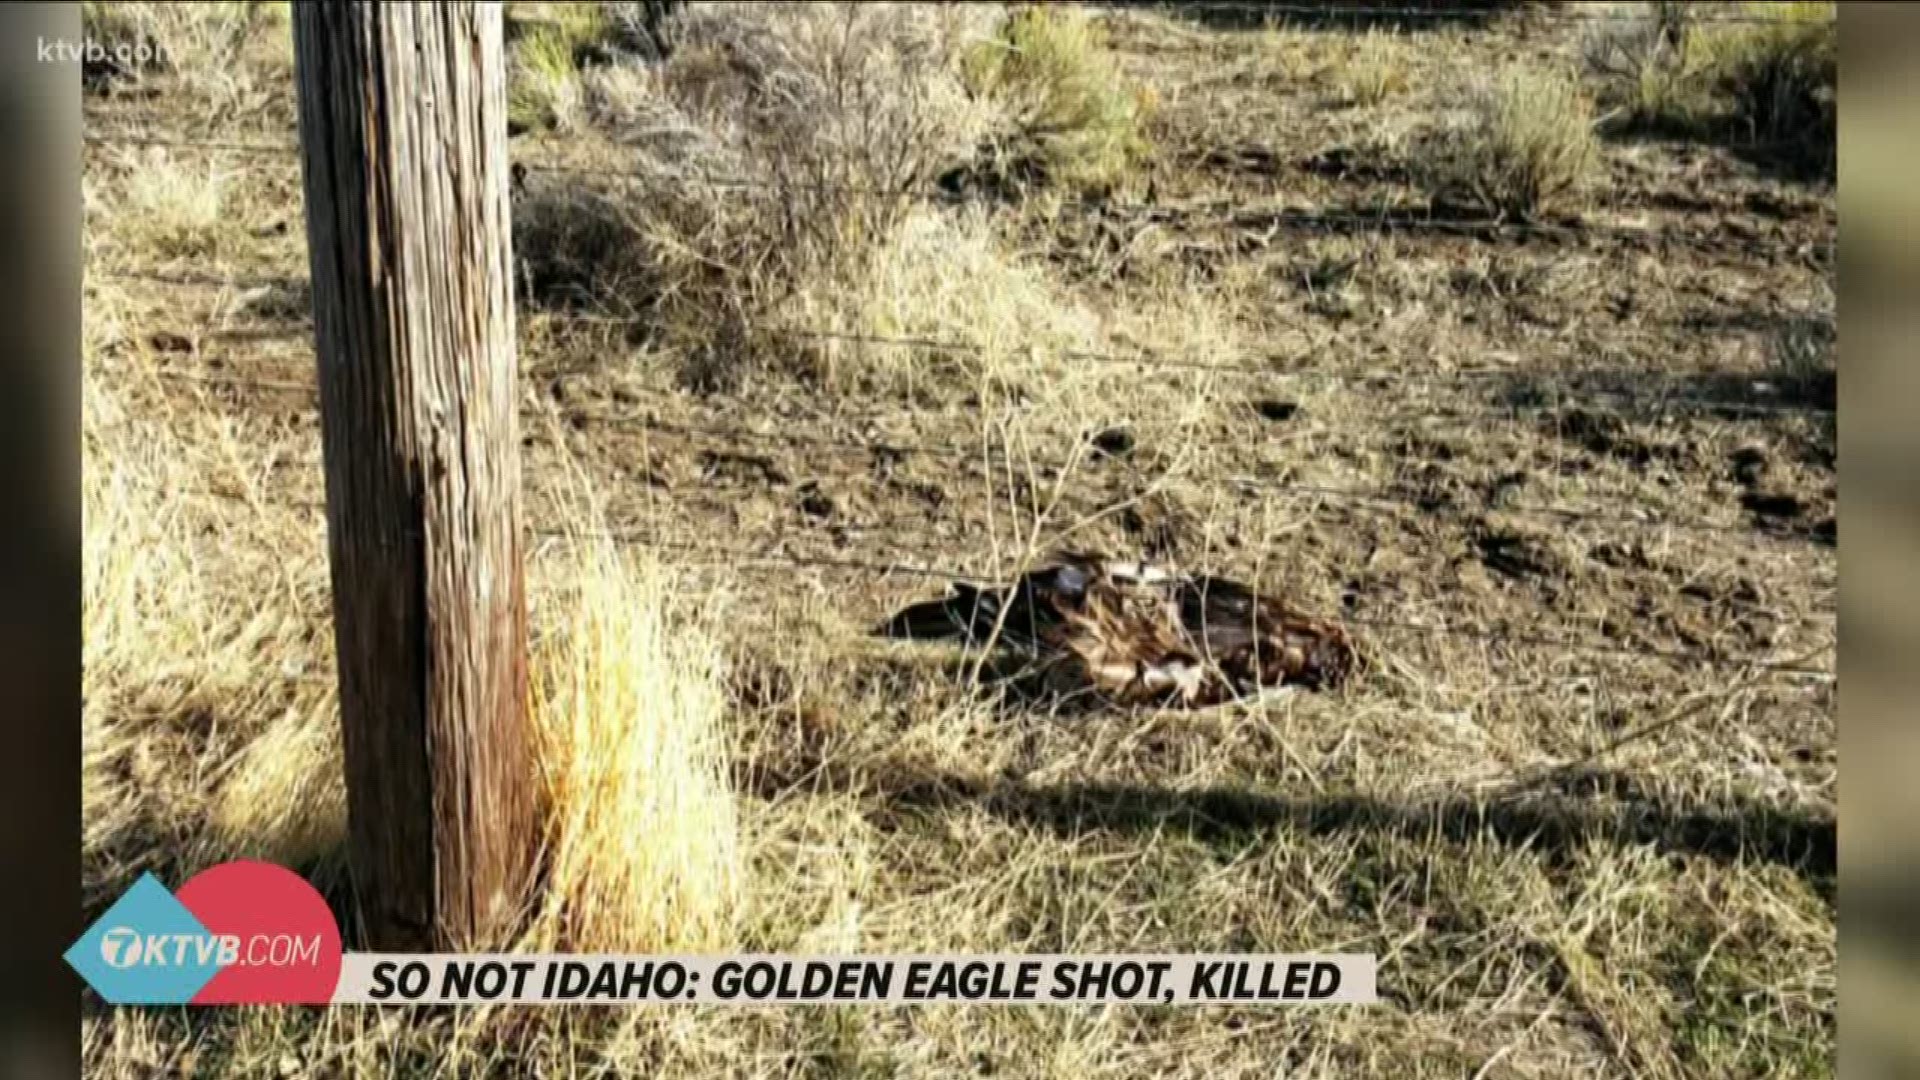 A full-grown Golden Eagle was found shot to death in Oakley in early February. Idaho Fish & Game are looking for a suspect.